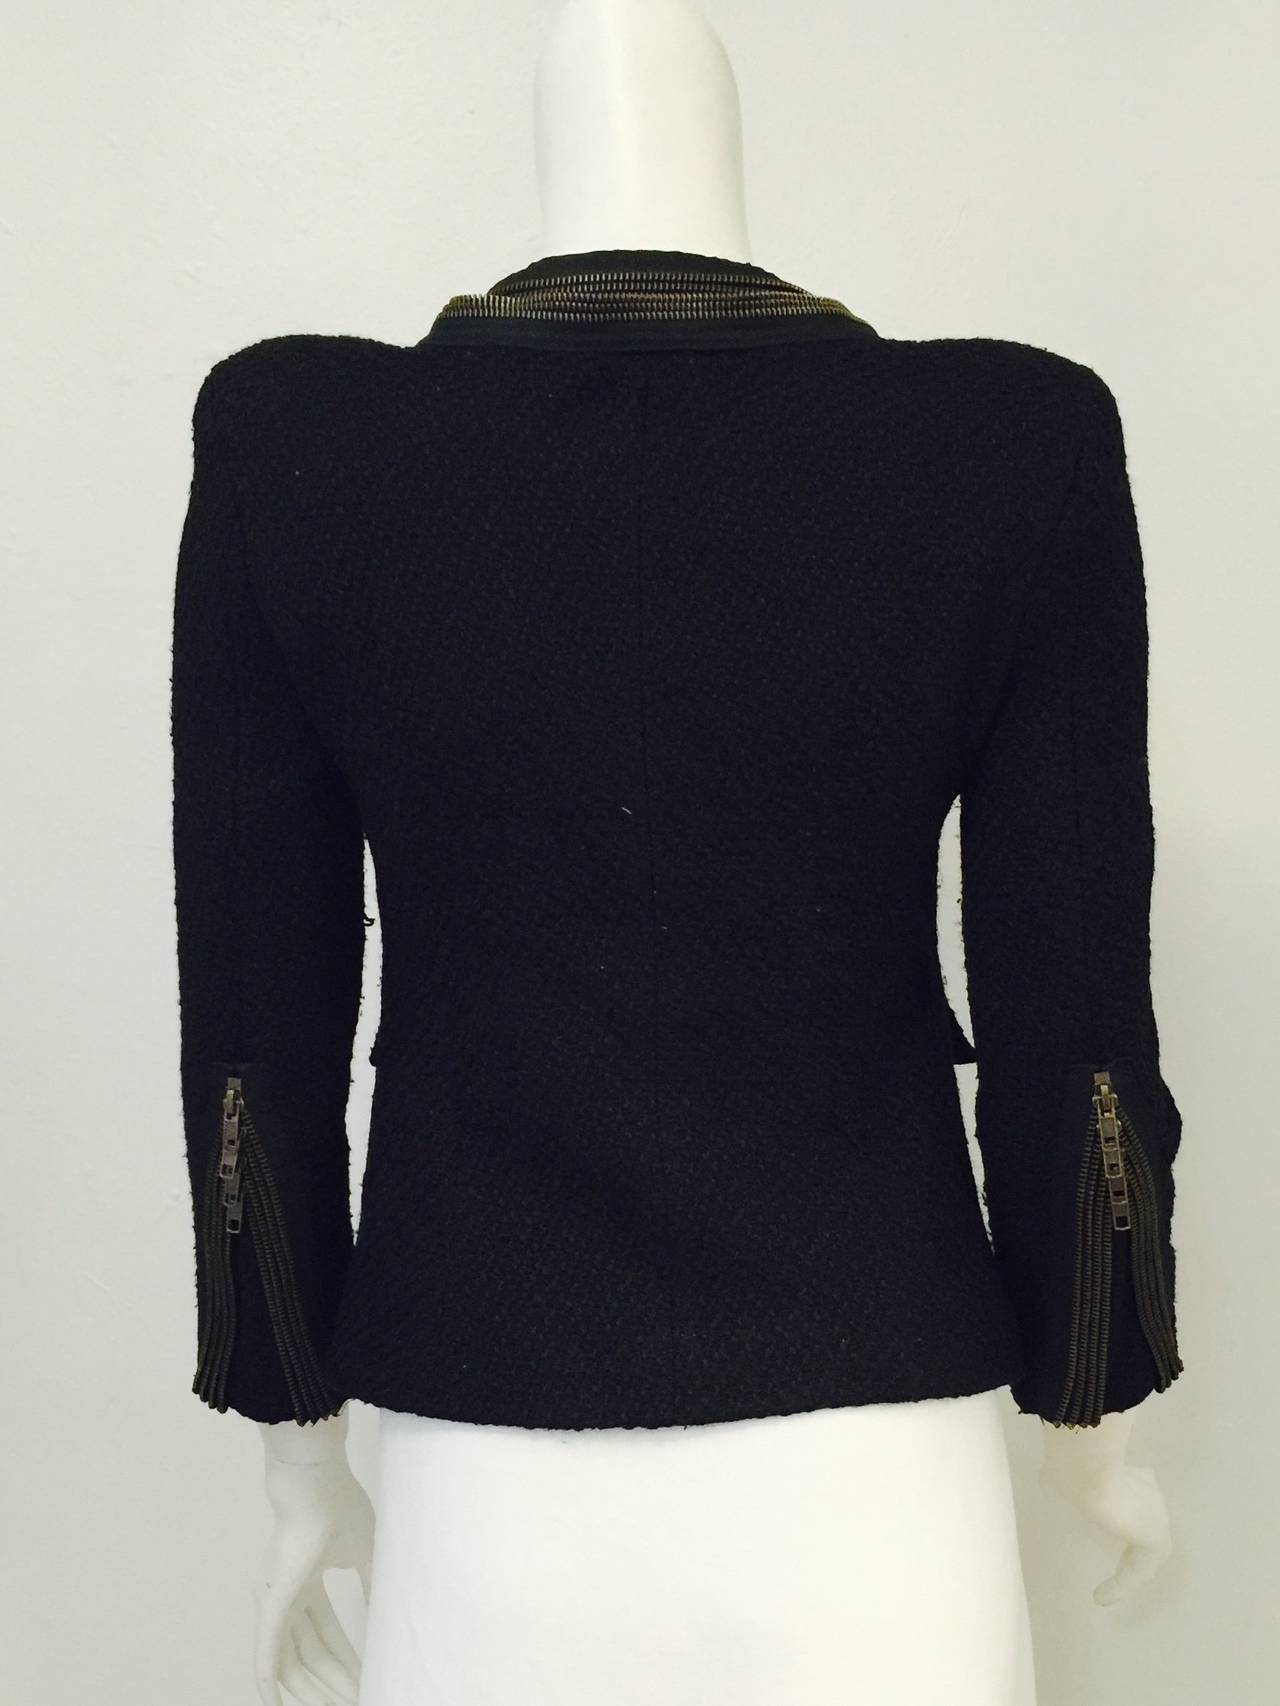 Black Alexander McQueen Cropped Textured Jacket With Multi Zipper Trim For Sale